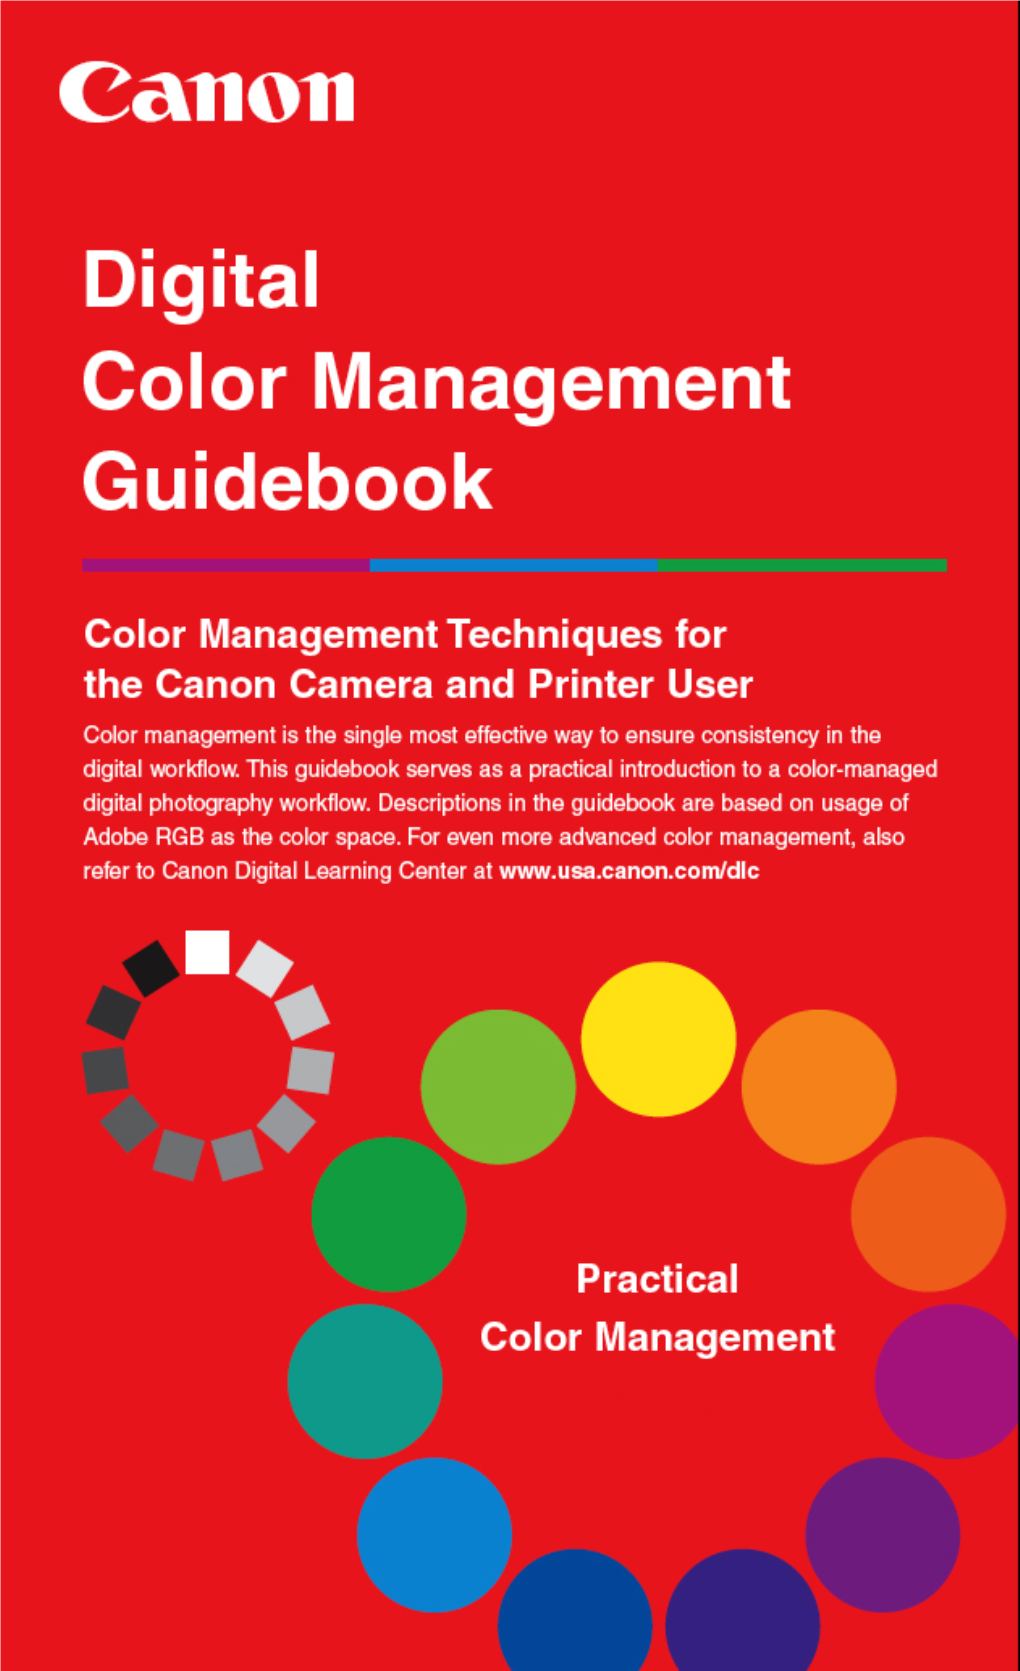 What Is Color Management?